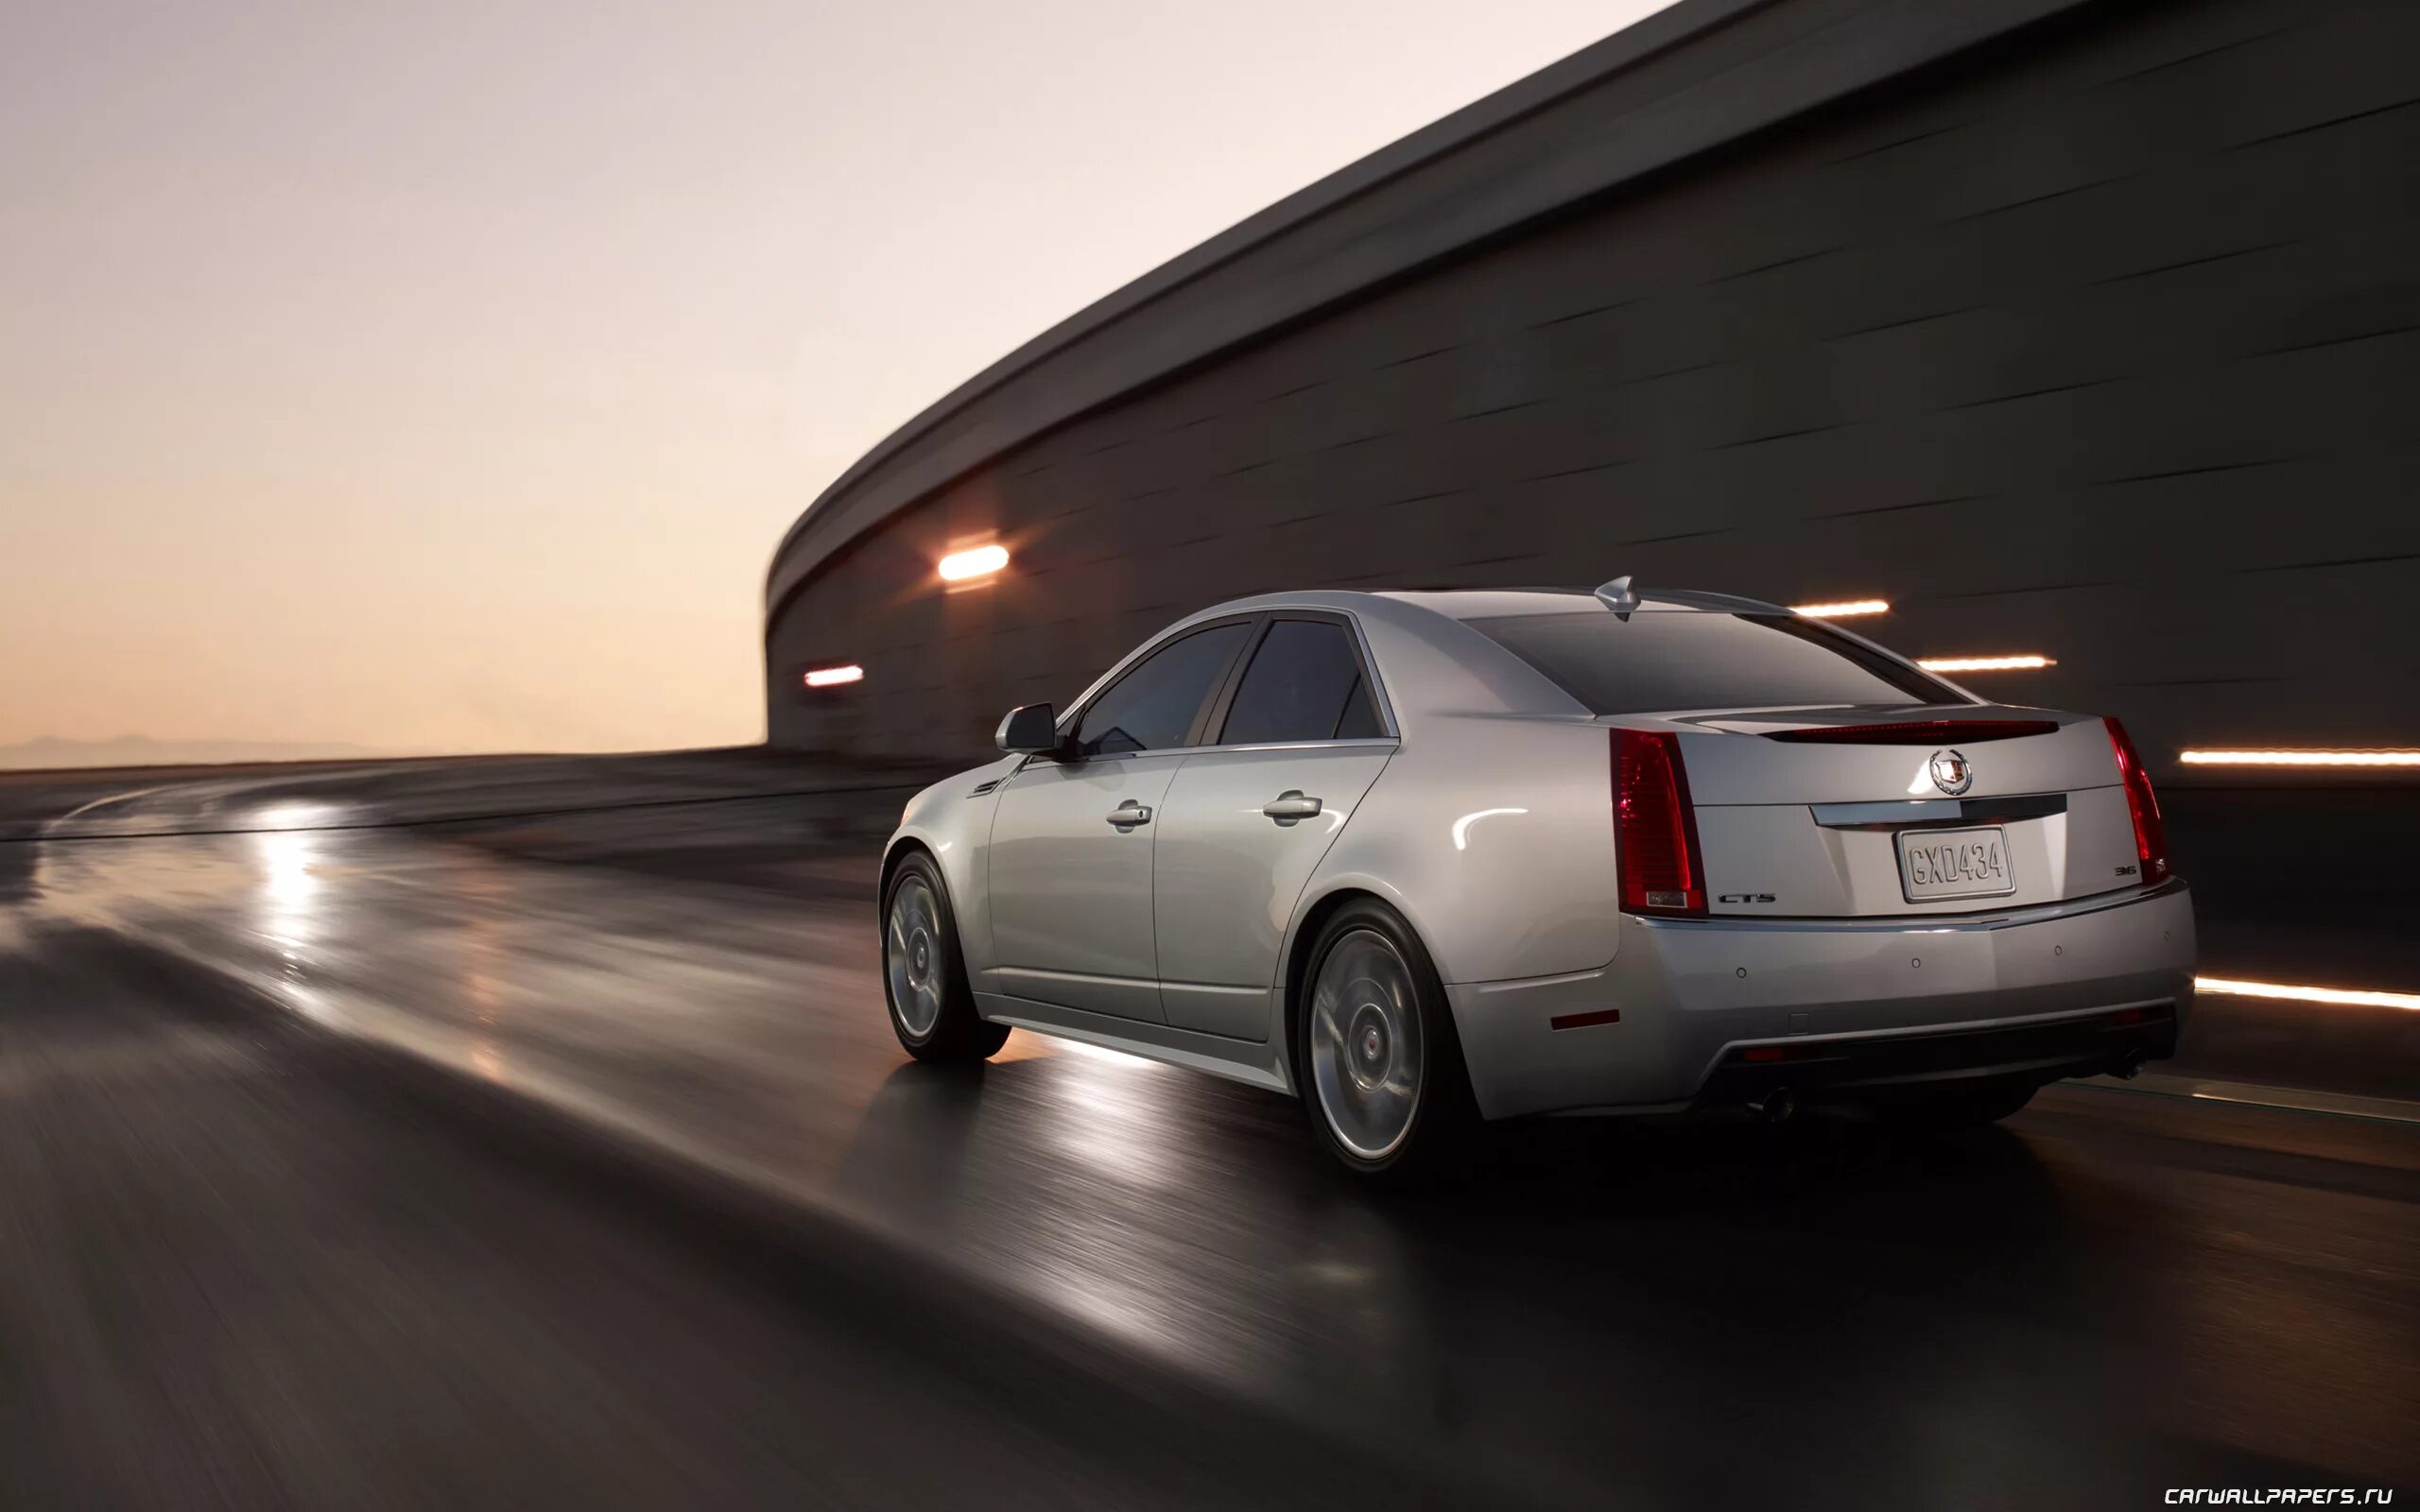 Кадиллак седан CTS. Cadillac CTS 2013. CTS V 2 седан. Кадиллак CTS 3.6 2011.